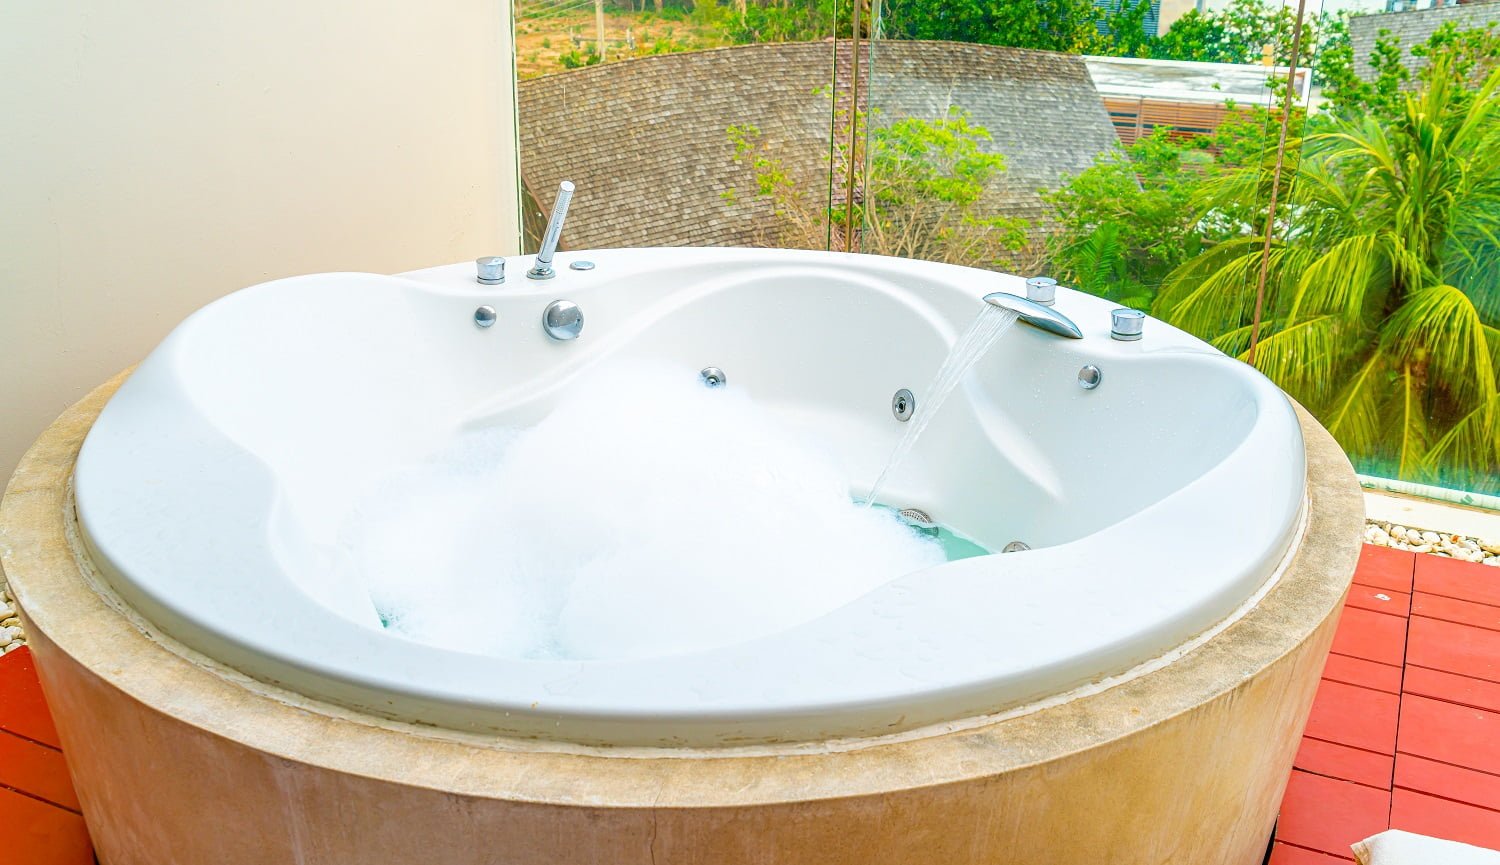 Jacuzz Best Places To Buy A Hot Tub decoration on balcony